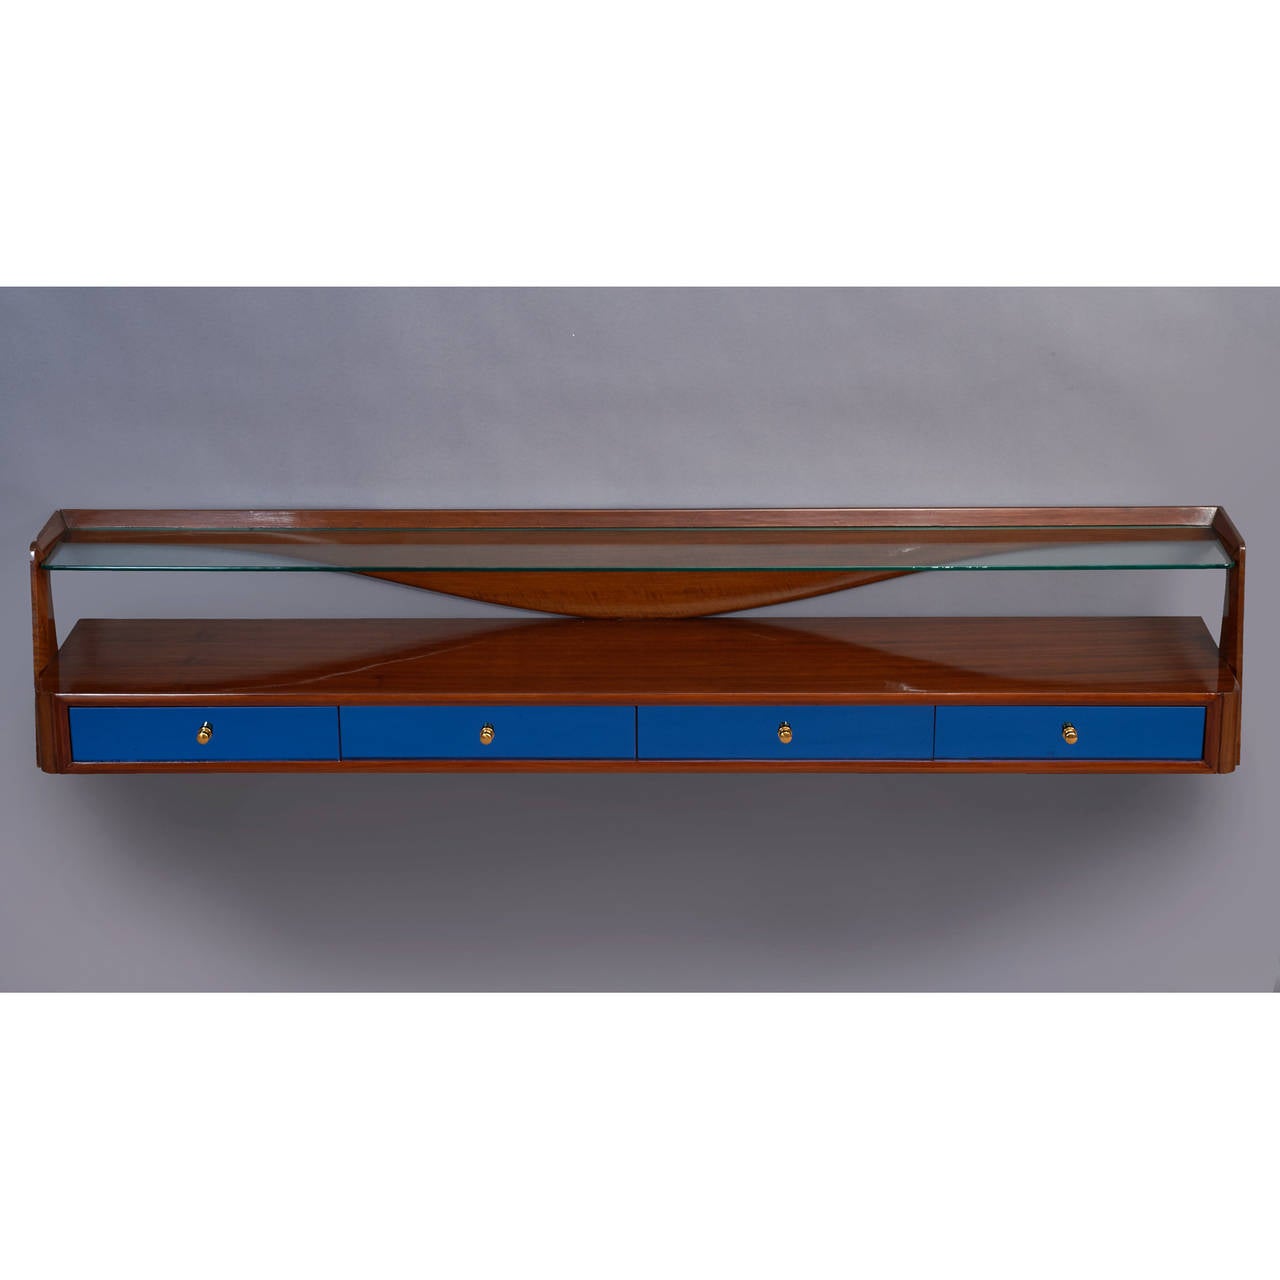 Polished Exquisite Wall-Mounted Walnut Console with Blue Mirrored Glass, Italy 1950s